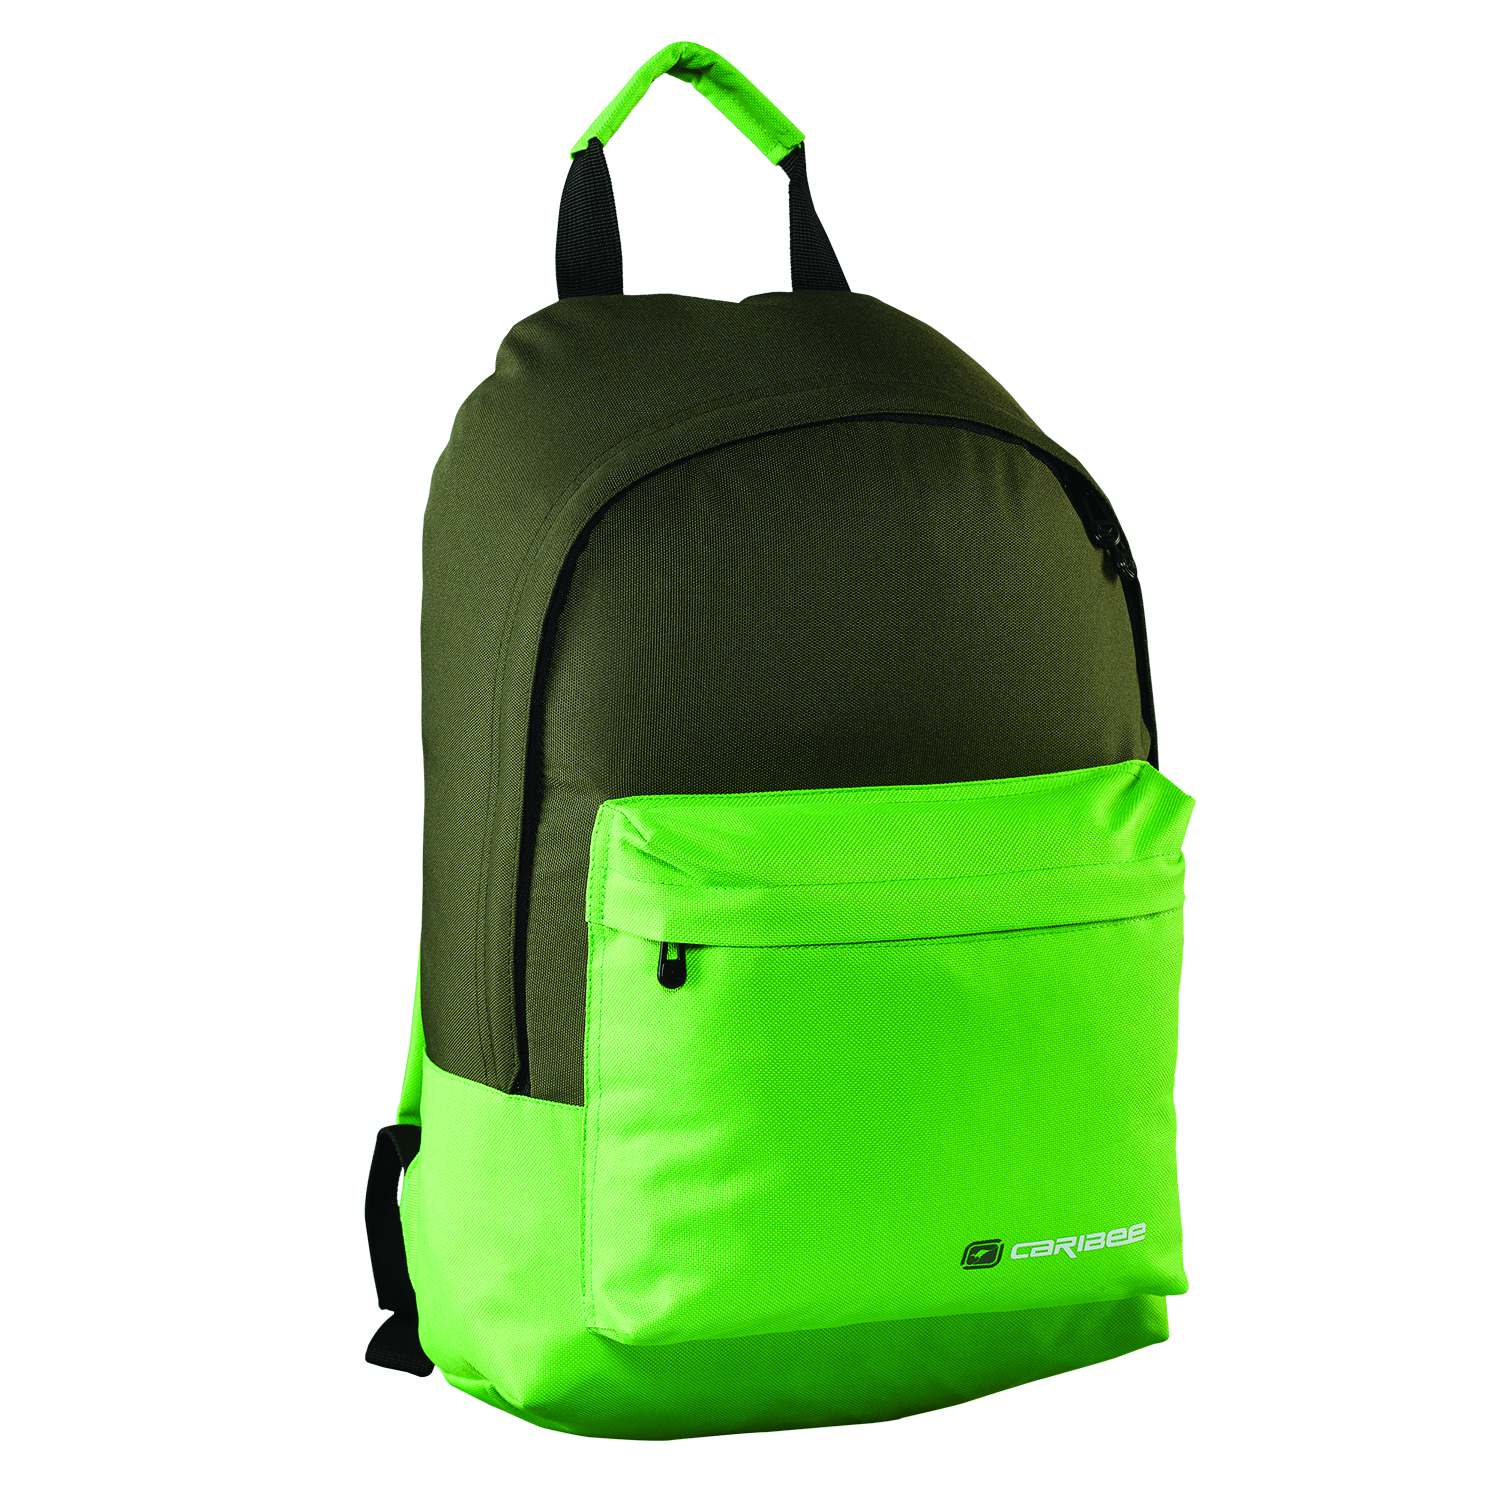 Small Backpack 22 Liter Caribee Campus Green